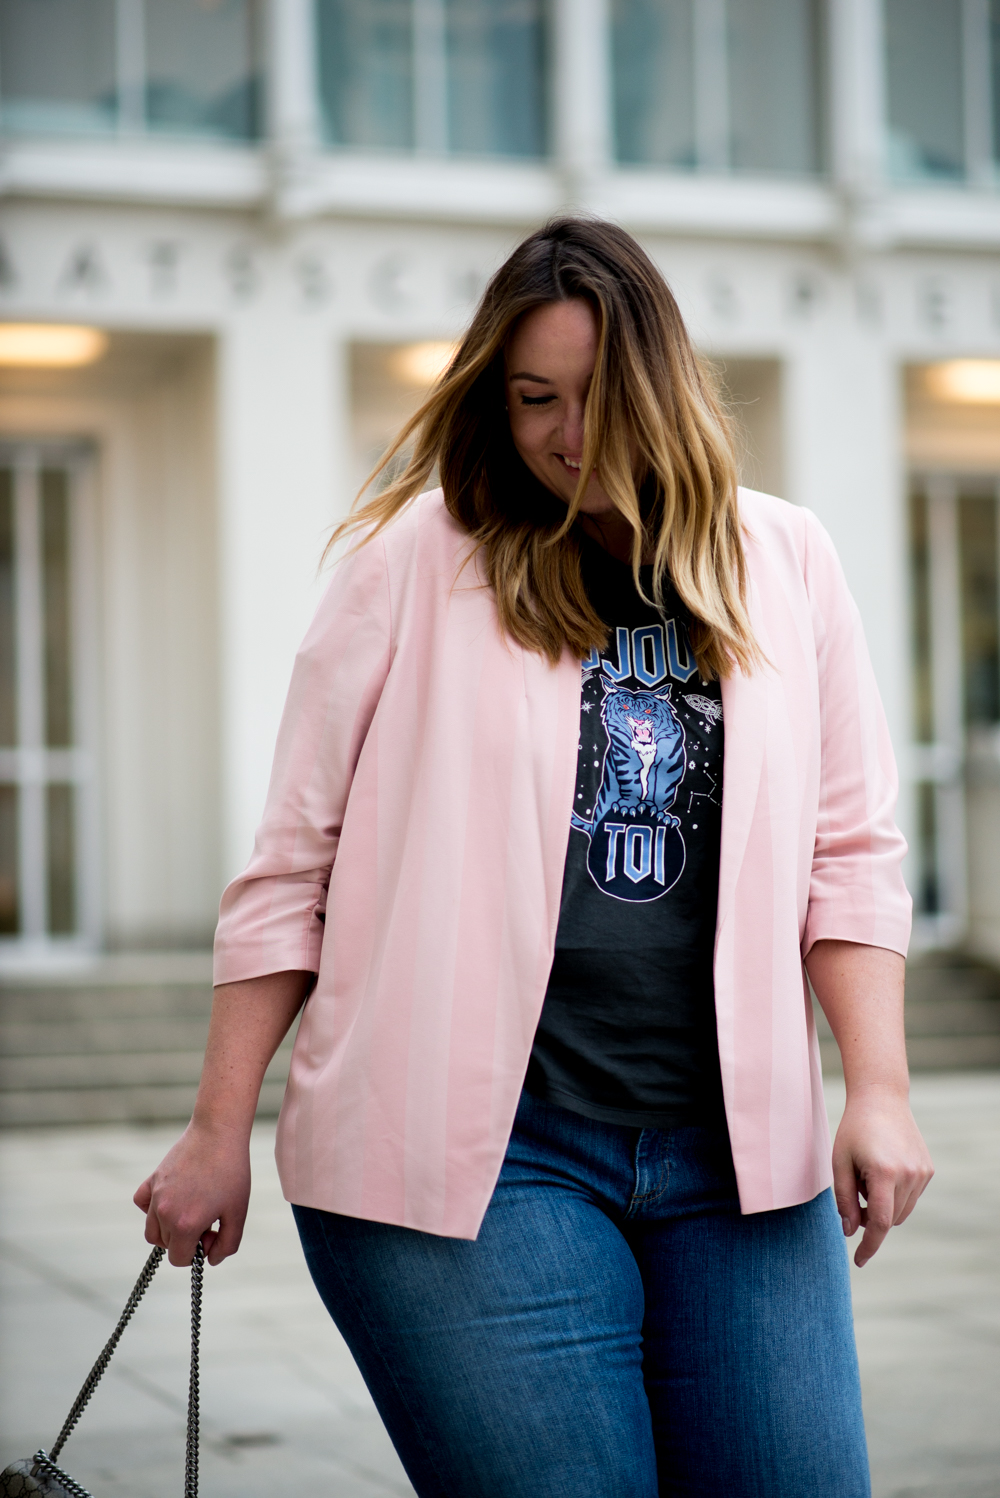 The Skinny and the Curvy One_Plussize_Blogger_Fashionblog Deutschland_Blogger_Curve Fashion (6 von 8)